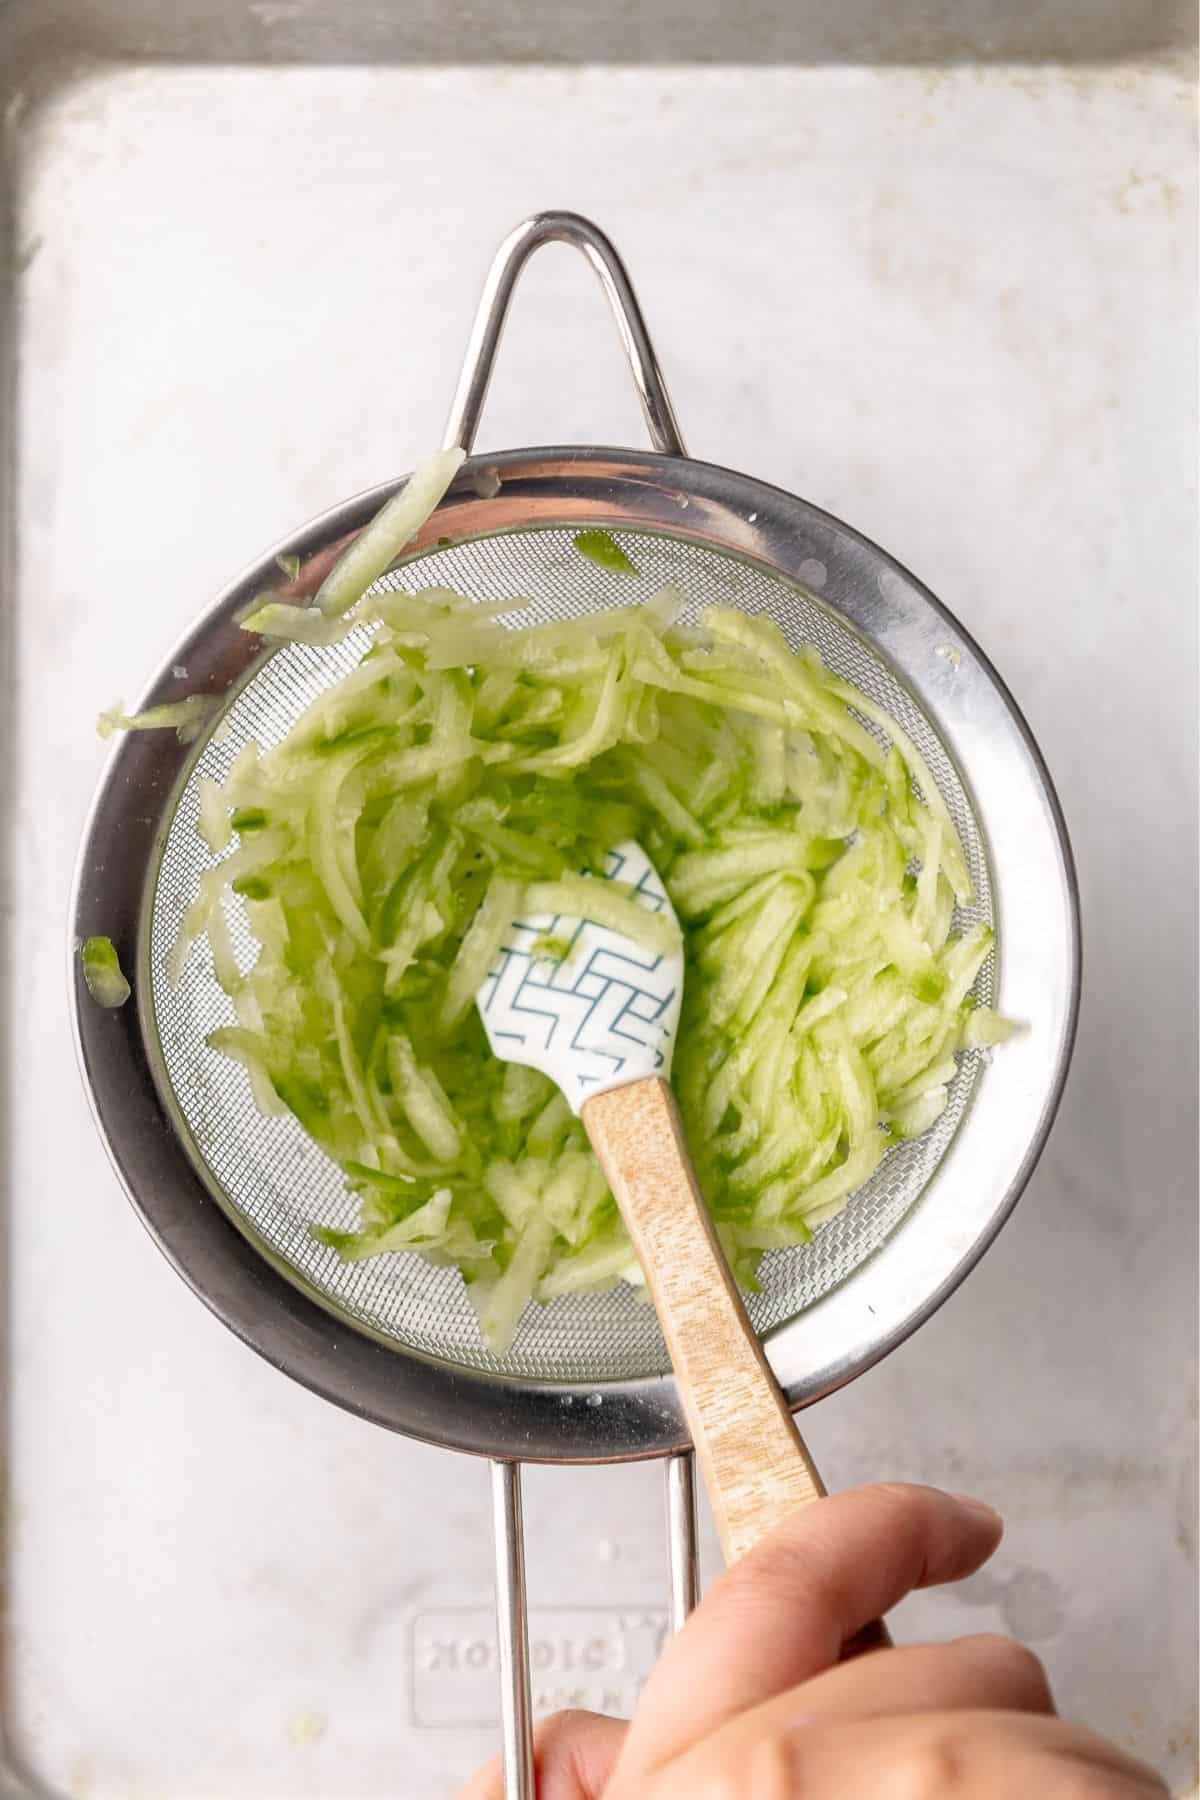 Shredded cucumber in a strainer, with a rubber spatula pressing liquid out.